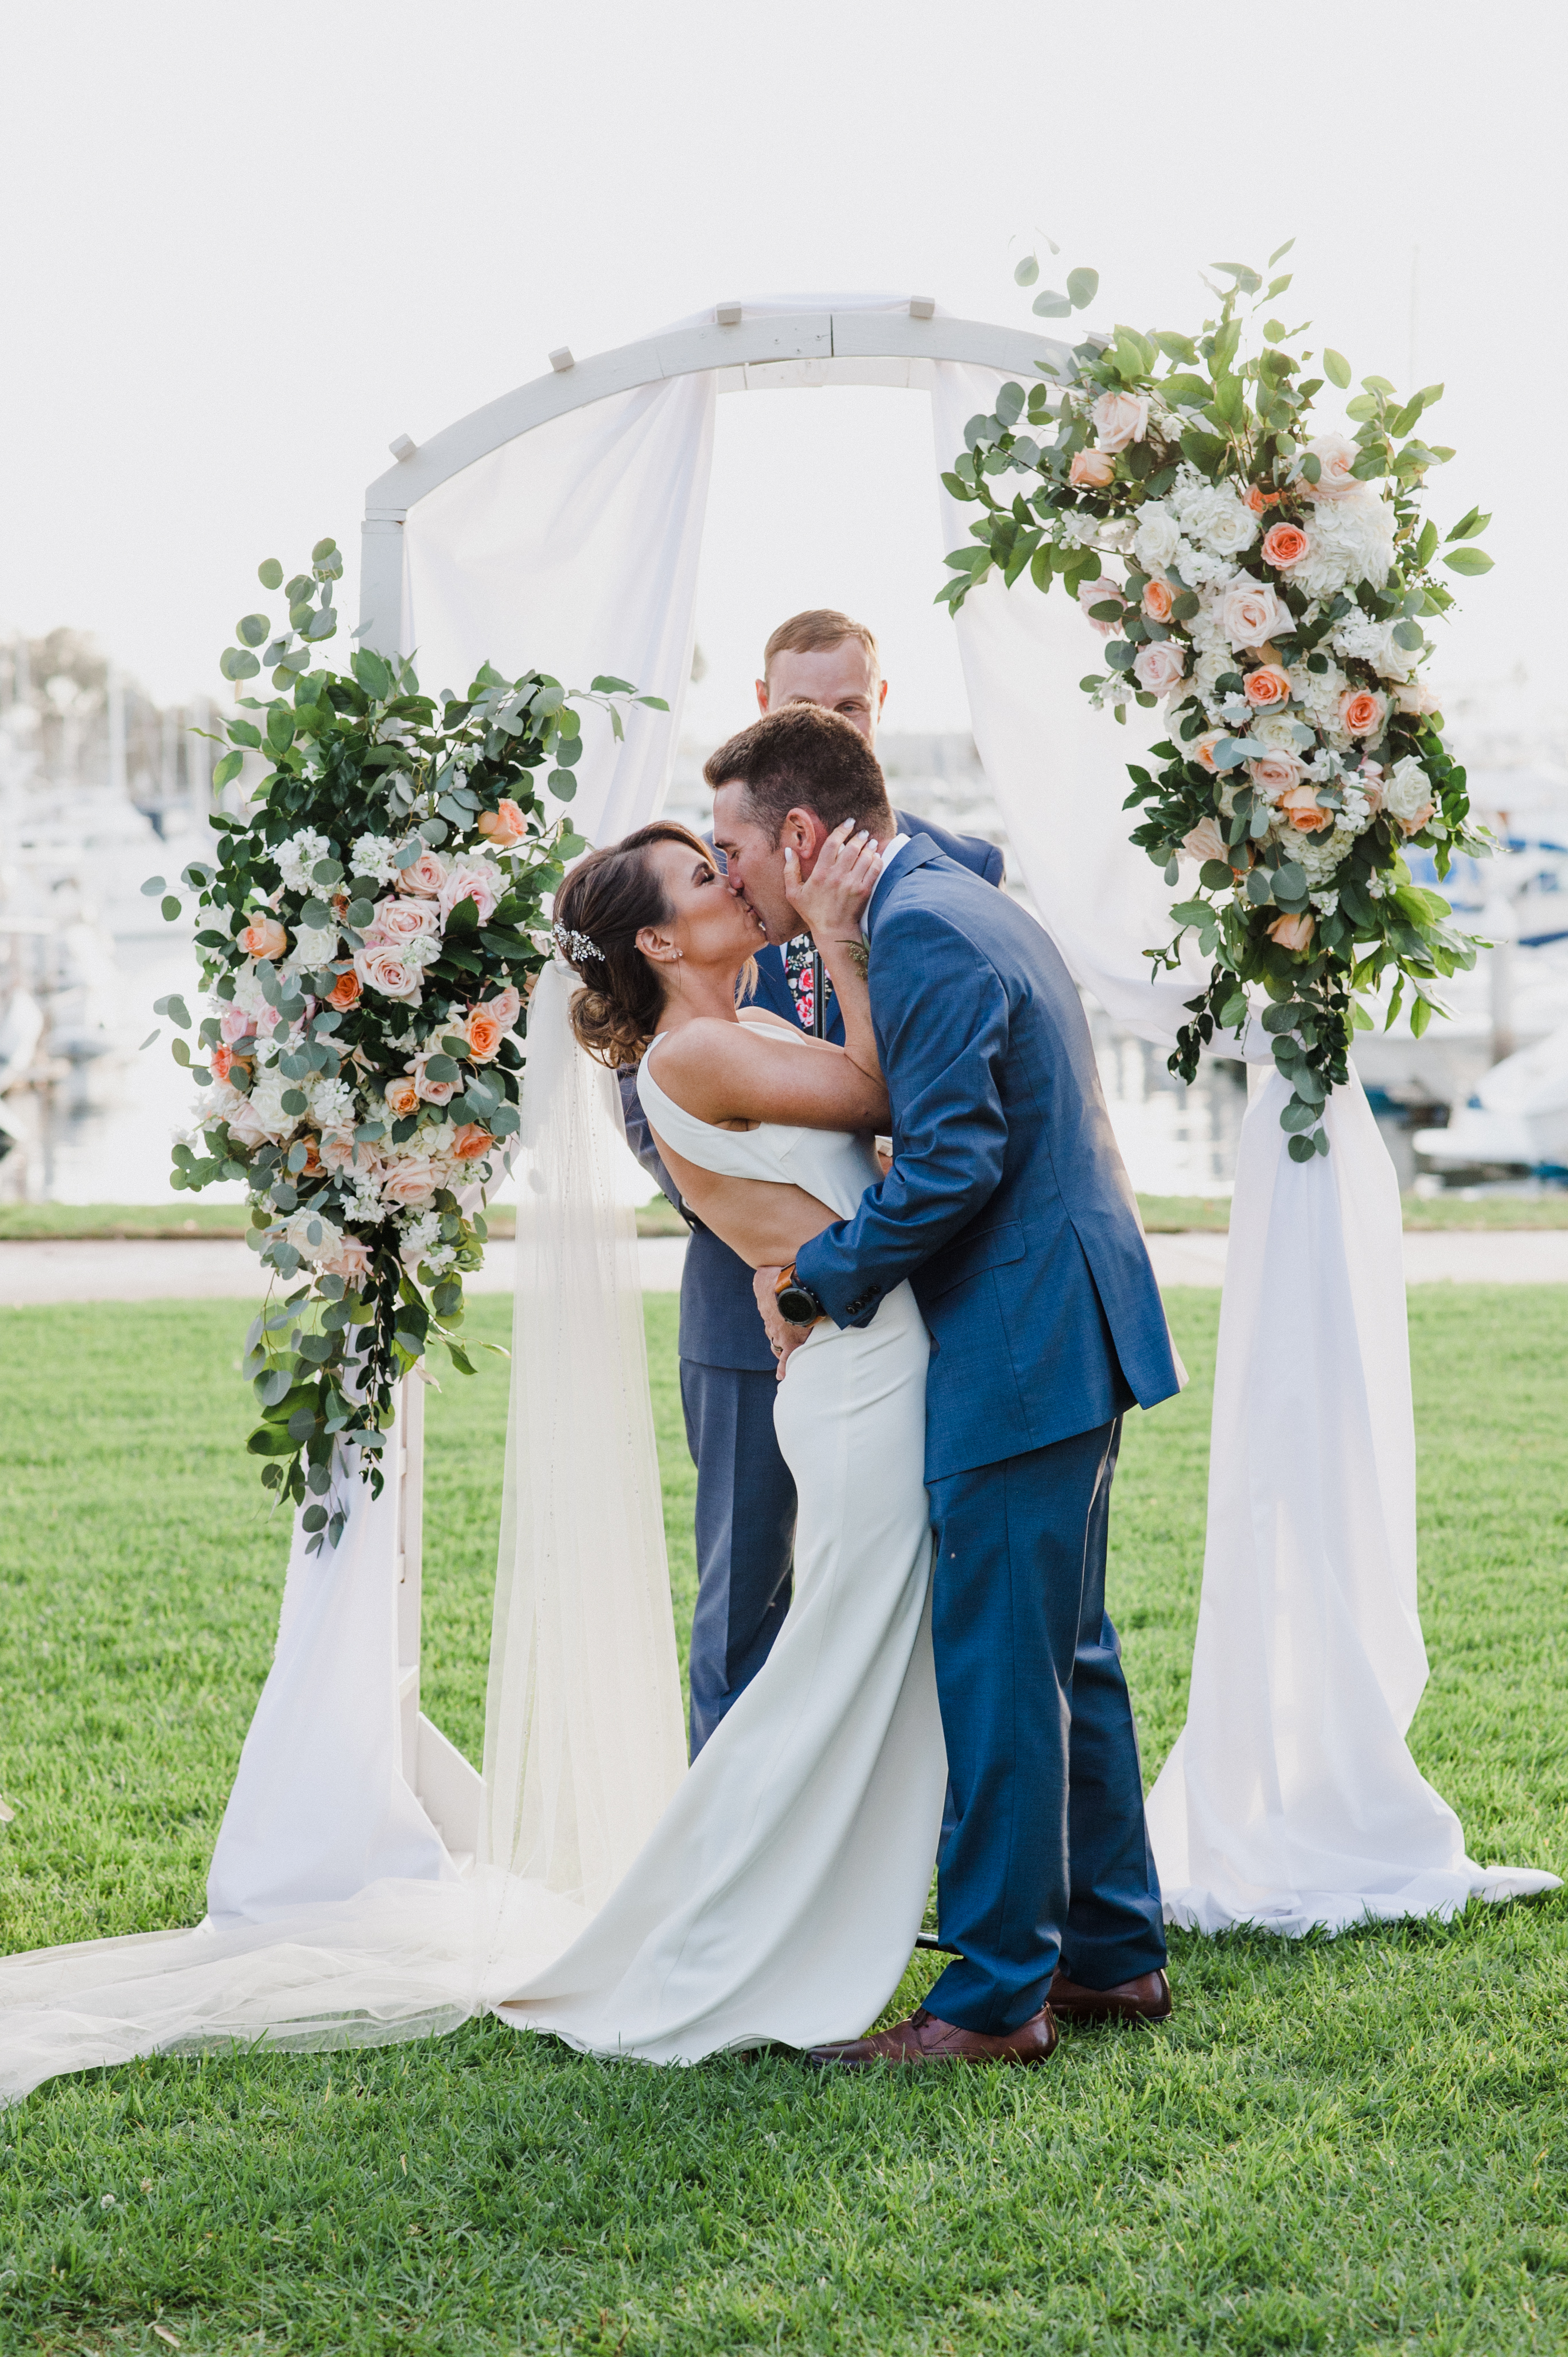 First kiss as husband and wifeat a Romantic Style San Diego Wedding at Marina Village by Kylie Rae Photography